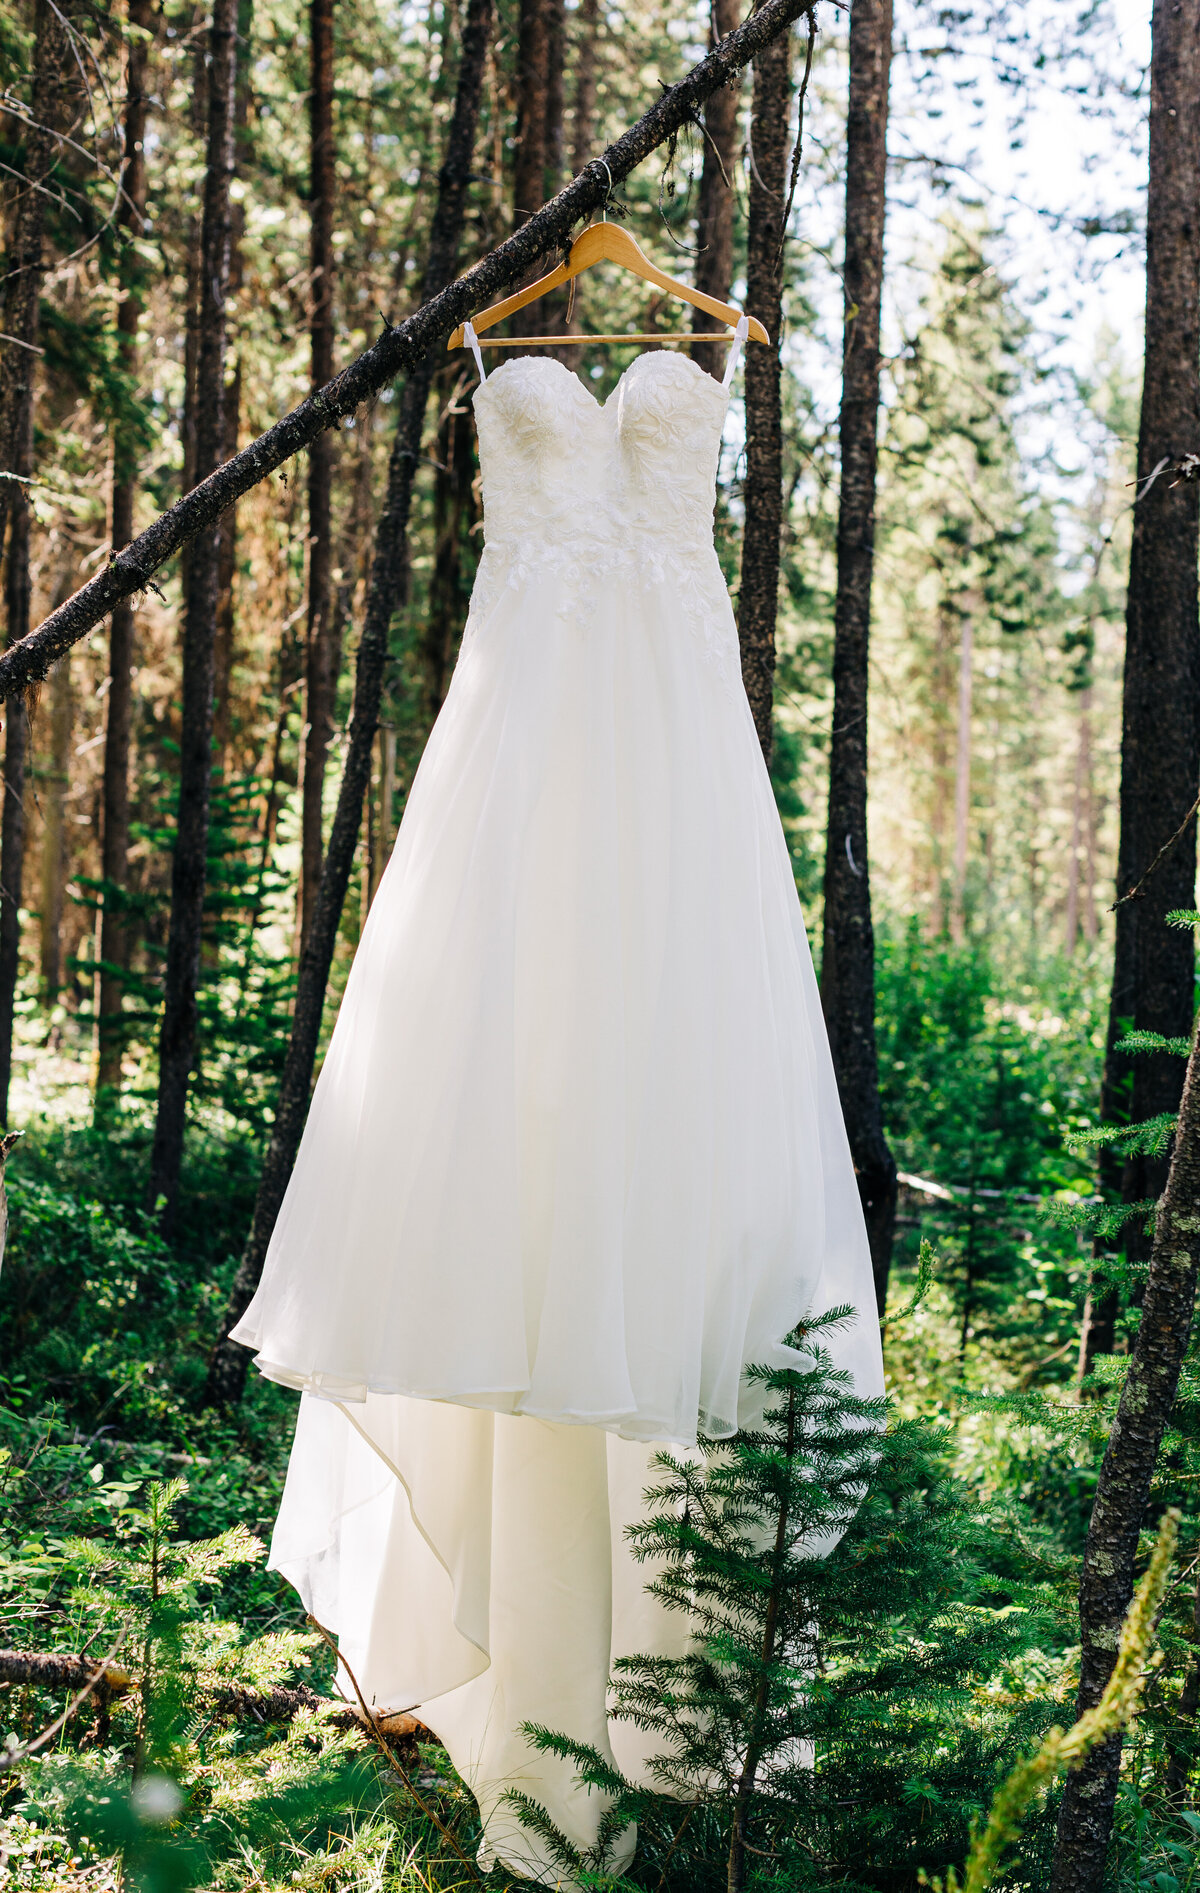 Elevate your wedding dress inspiration with our stunning collection of high-quality wedding dress photos in Glacier Montana